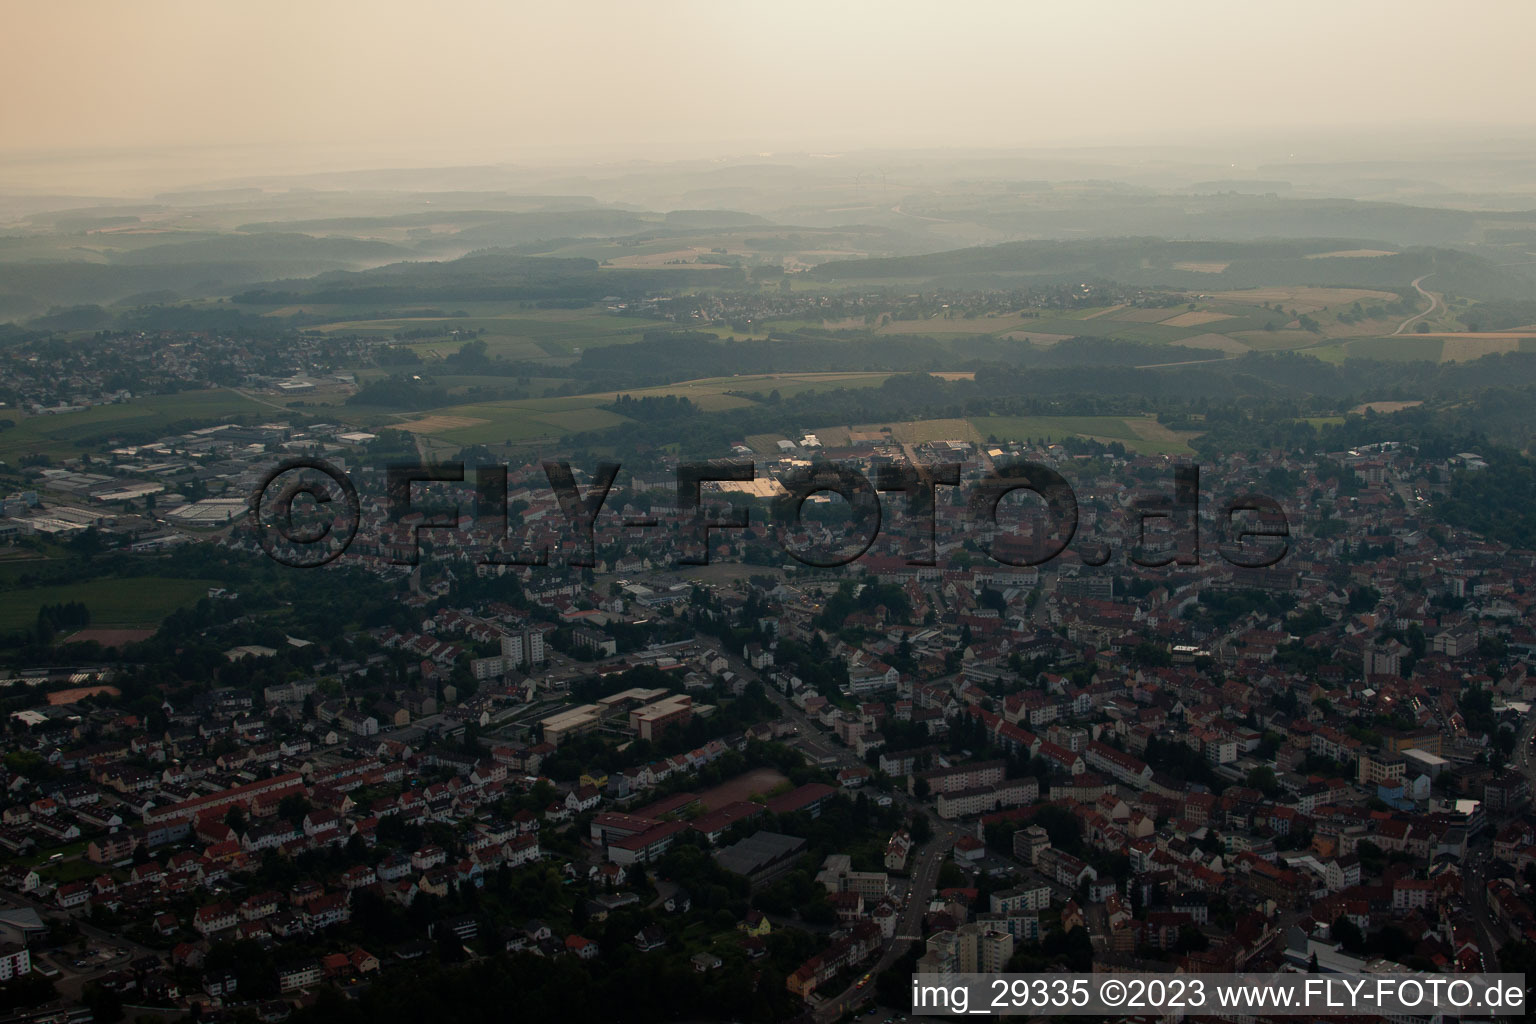 Oblique view of Pirmasens in the state Rhineland-Palatinate, Germany